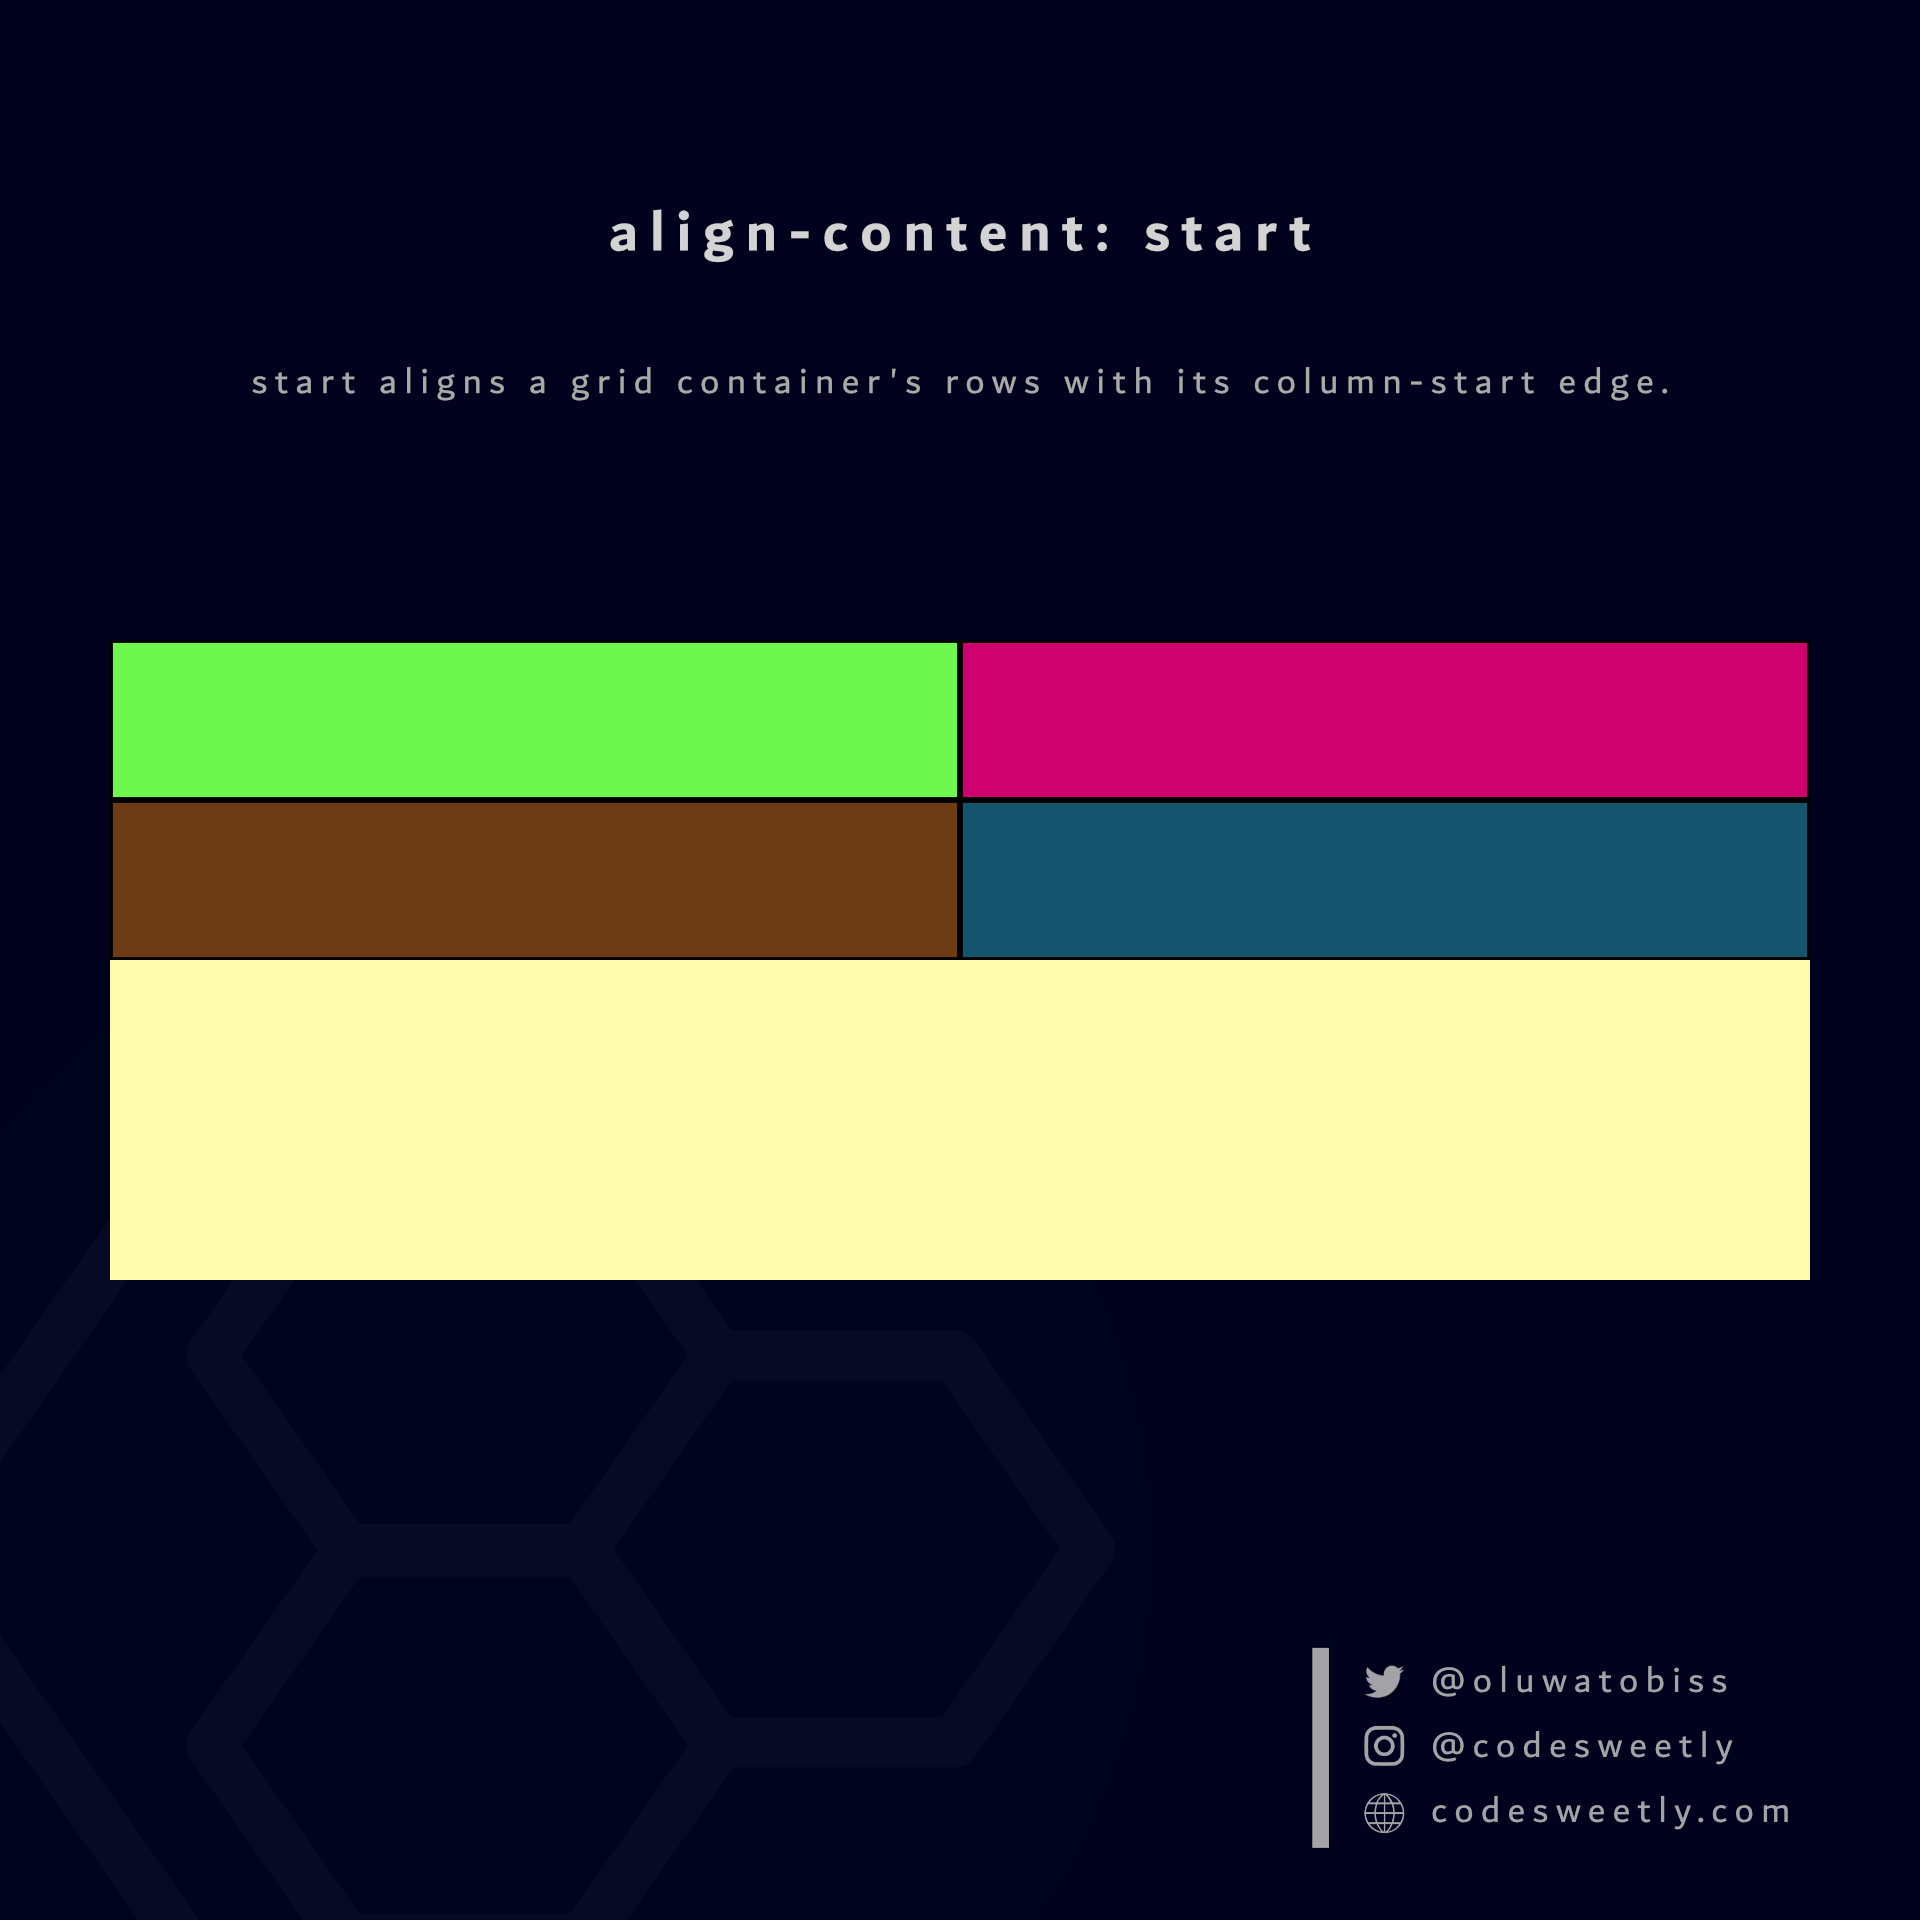 align-content's start value aligns rows to the grid container's column-start edge